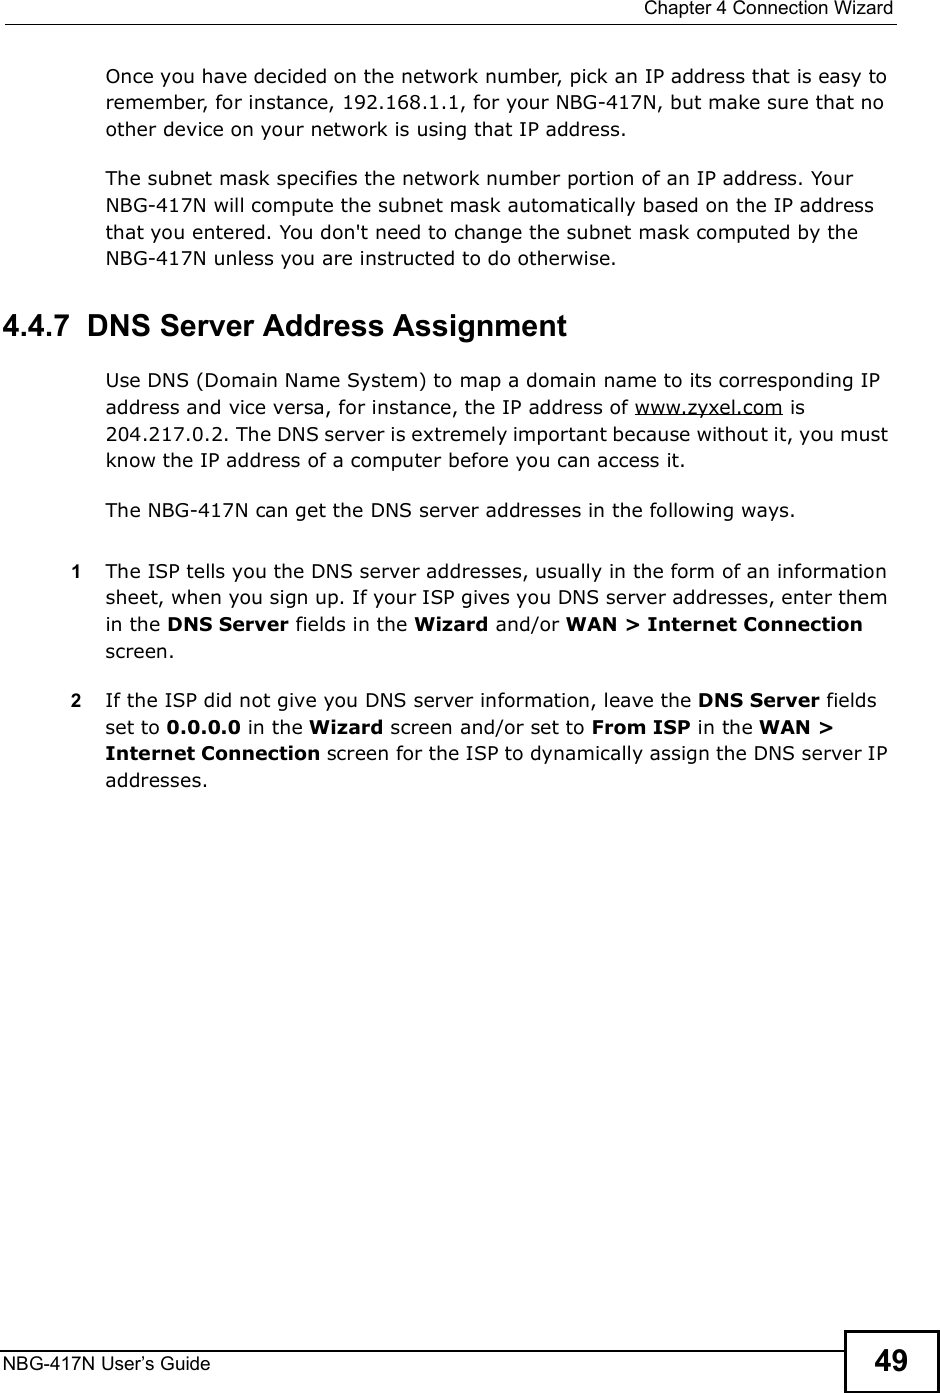  Chapter 4Connection WizardNBG-417N User s Guide 49Once you have decided on the network number, pick an IP address that is easy to remember, for instance, 192.168.1.1, for your NBG-417N, but make sure that no other device on your network is using that IP address.The subnet mask specifies the network number portion of an IP address. Your NBG-417N will compute the subnet mask automatically based on the IP address that you entered. You don&apos;t need to change the subnet mask computed by the NBG-417N unless you are instructed to do otherwise.4.4.7  DNS Server Address AssignmentUse DNS (Domain Name System) to map a domain name to its corresponding IP address and vice versa, for instance, the IP address of www.zyxel.com is 204.217.0.2. The DNS server is extremely important because without it, you must know the IP address of a computer before you can access it. The NBG-417N can get the DNS server addresses in the following ways.1The ISP tells you the DNS server addresses, usually in the form of an information sheet, when you sign up. If your ISP gives you DNS server addresses, enter them in the DNS Server fields in the Wizard and/or WAN &gt; Internet Connection screen.2If the ISP did not give you DNS server information, leave the DNS Server fields set to 0.0.0.0 in the Wizard screen and/or set to From ISP in the WAN &gt; Internet Connection screen for the ISP to dynamically assign the DNS server IP addresses.